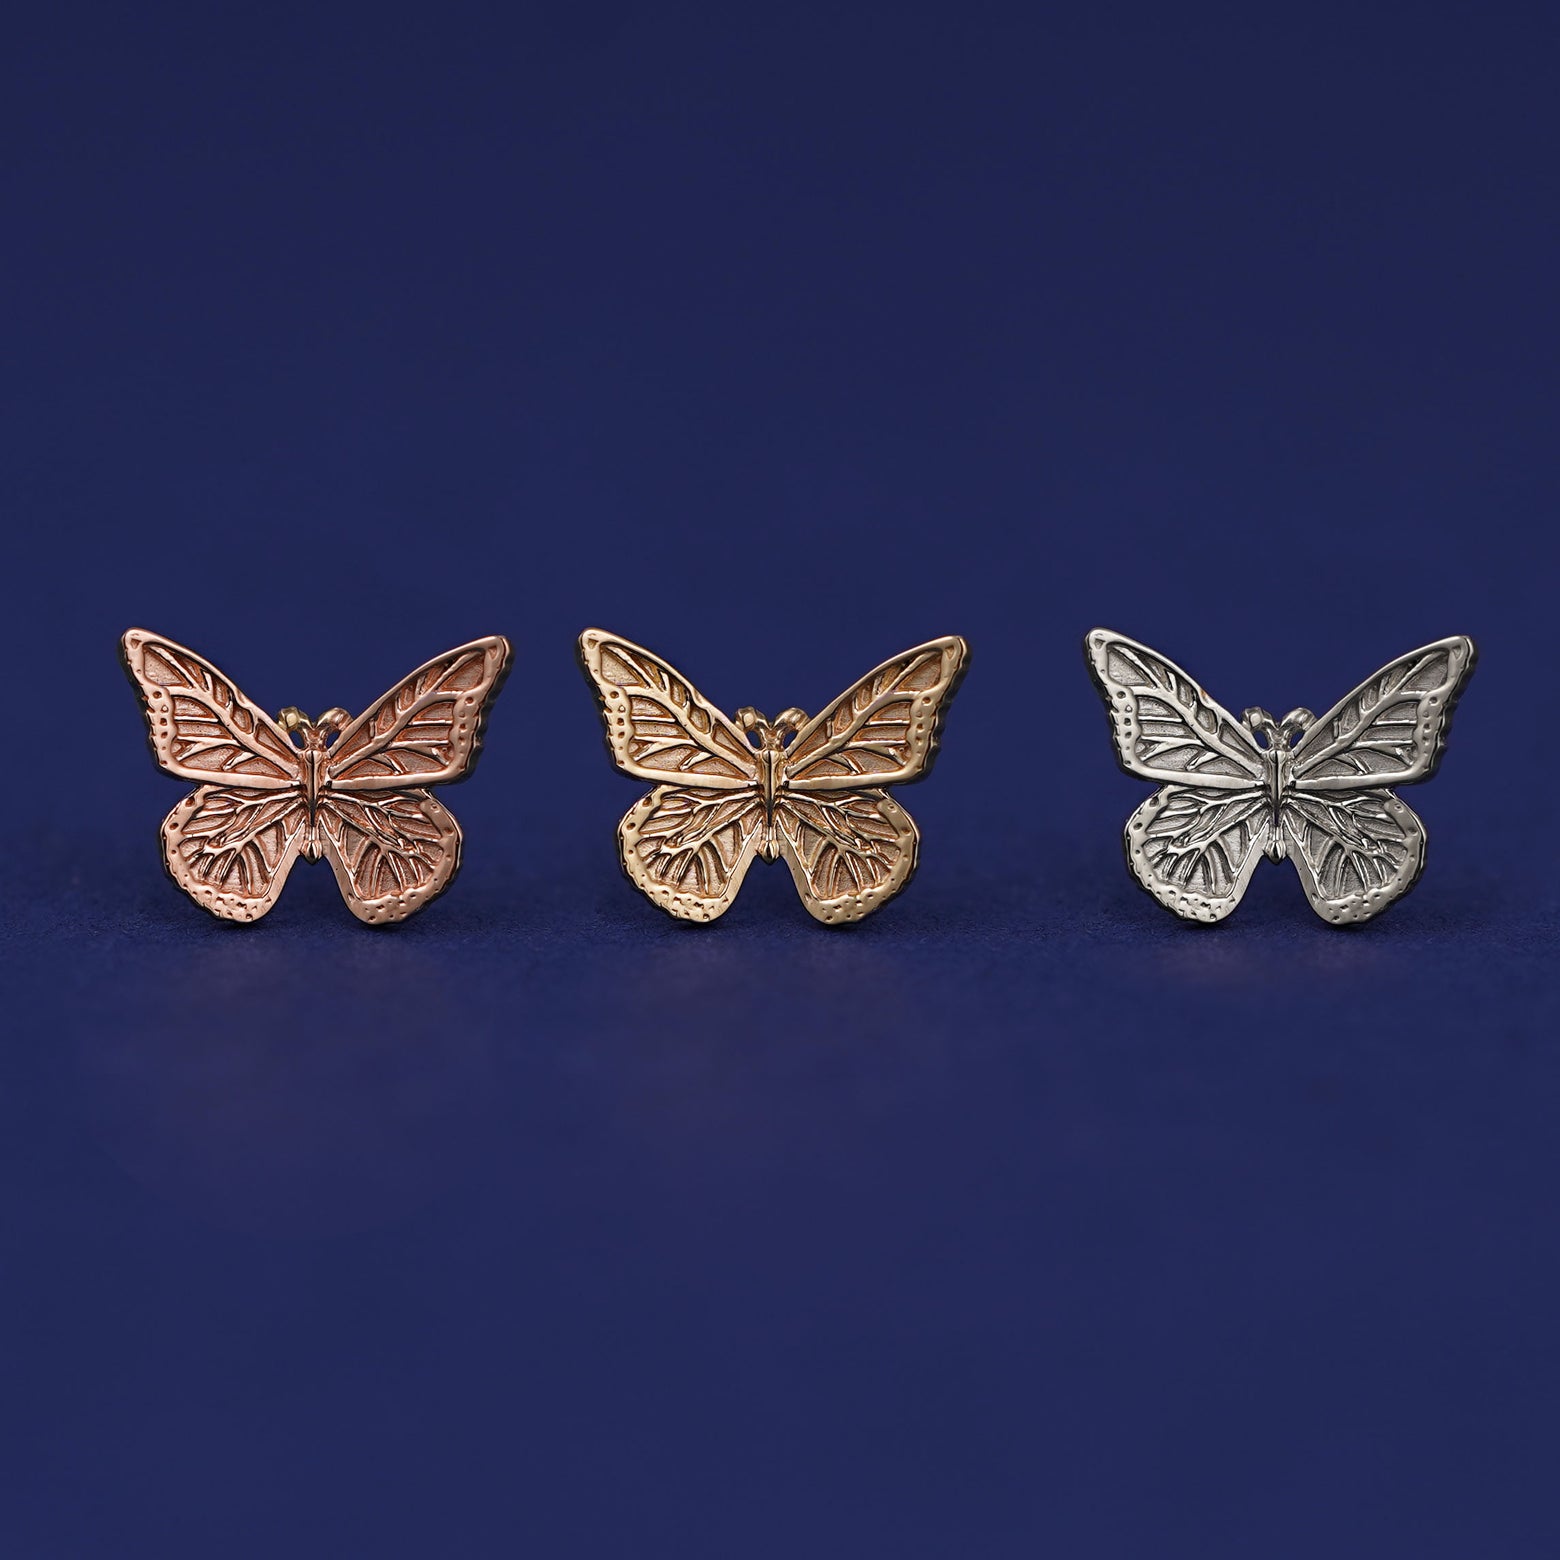 Three versions of the Butterfly Earring shown in options of yellow, white, and rose gold